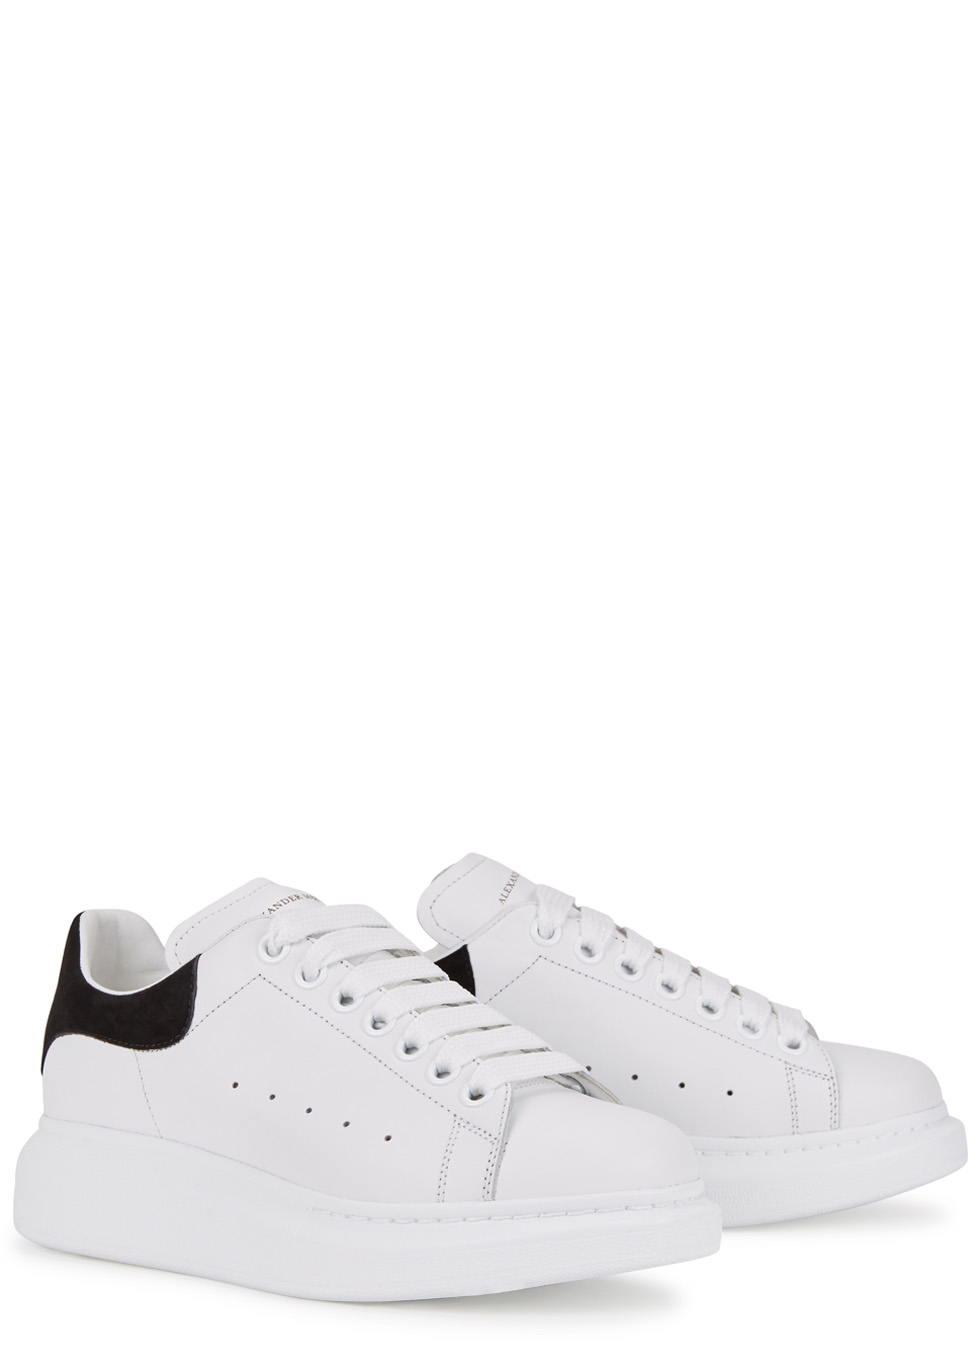 black and white mcqueen trainers